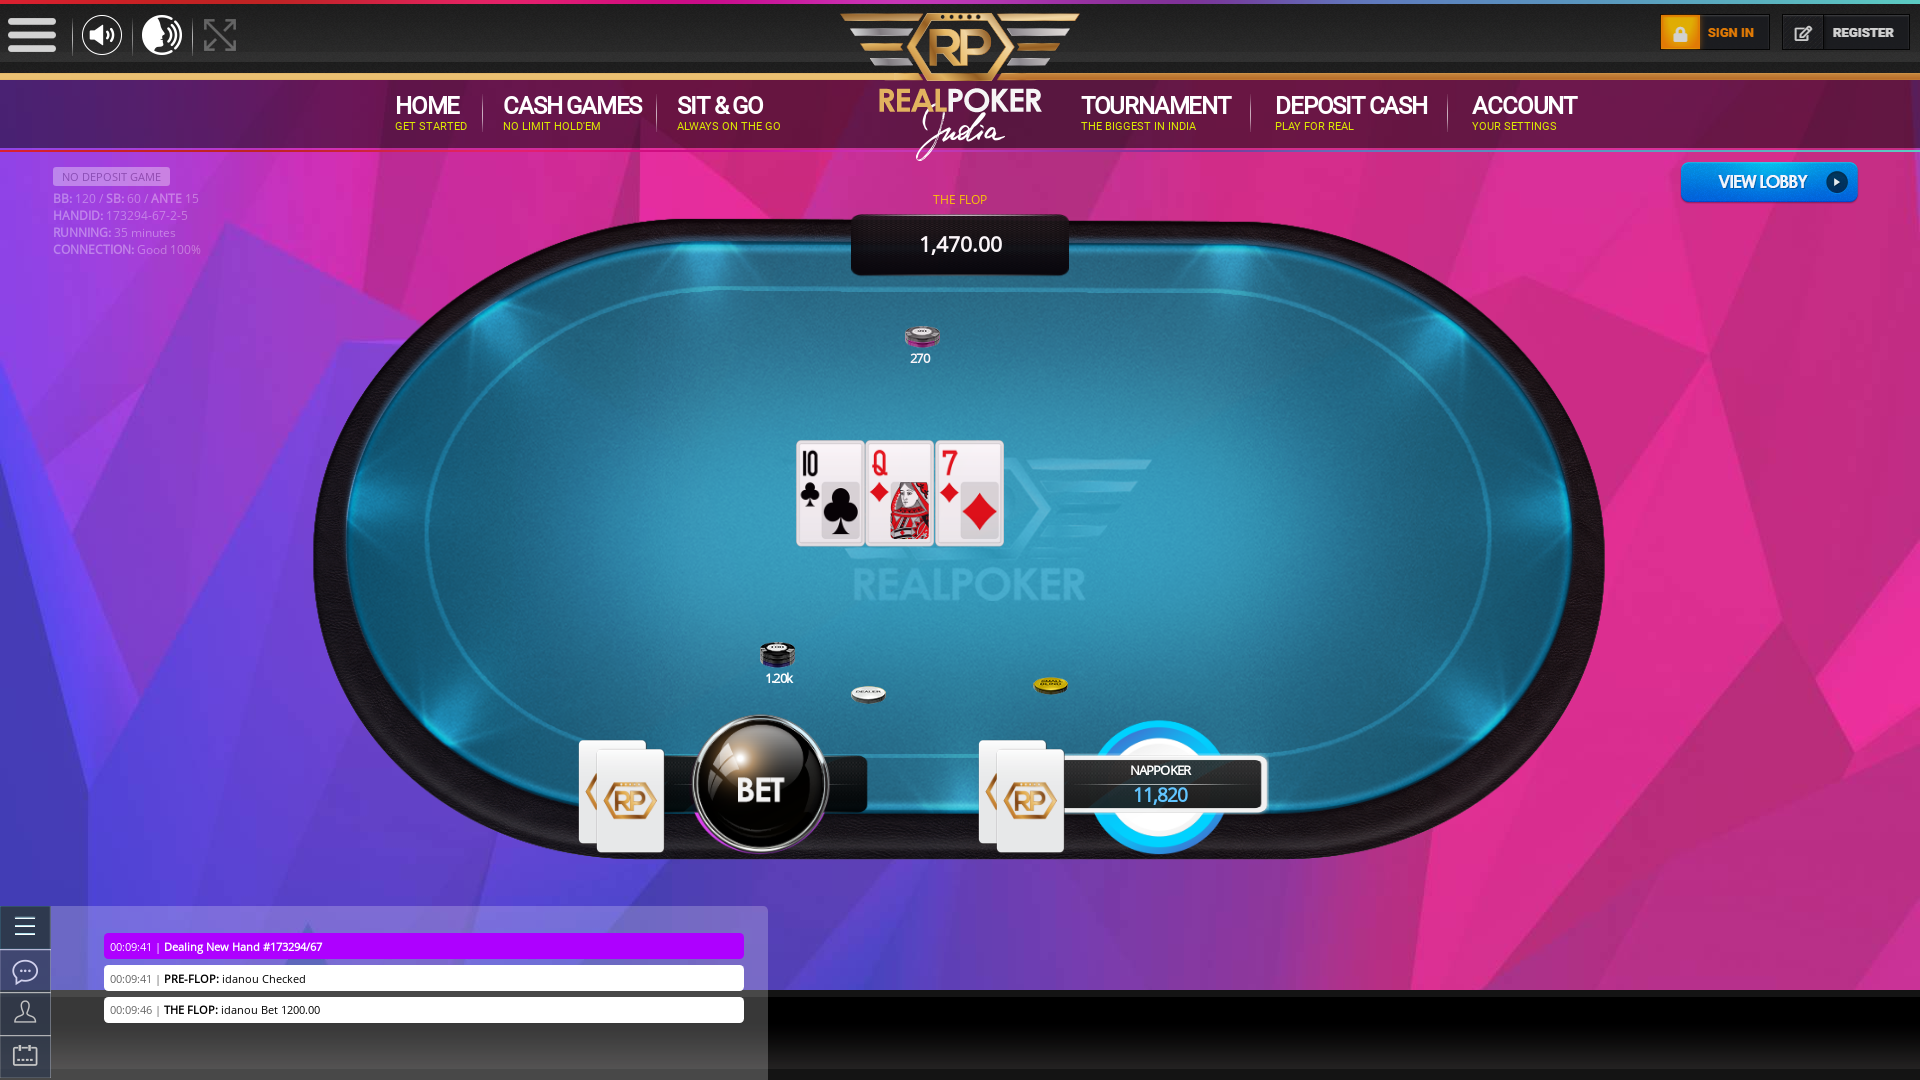 Indian online poker on a 10 player table in the 35th minute match up